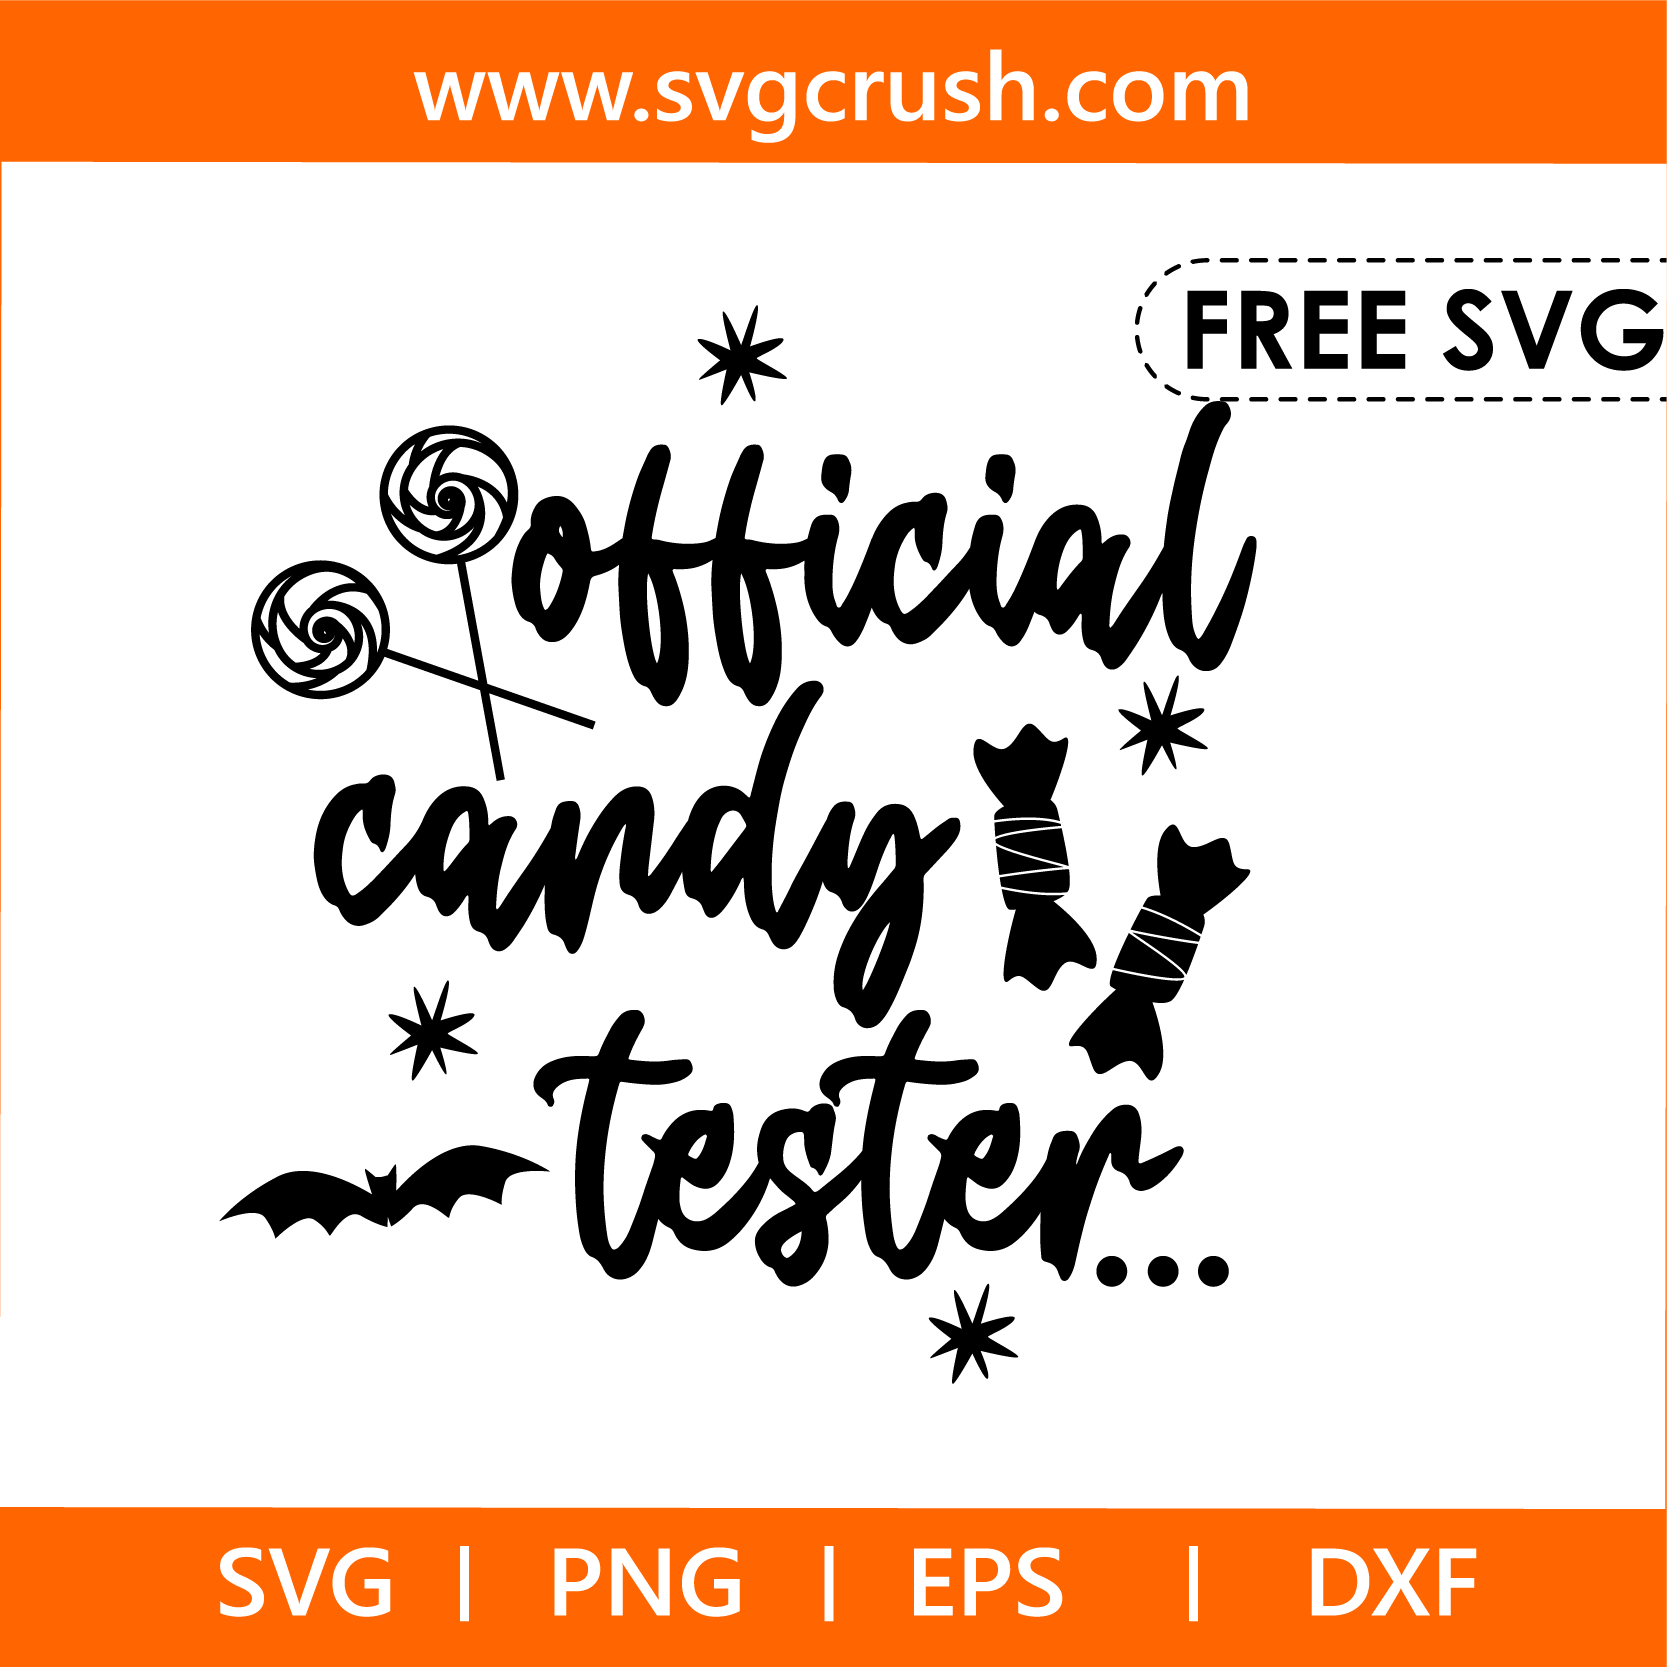 free official-candy-tester-003 svg